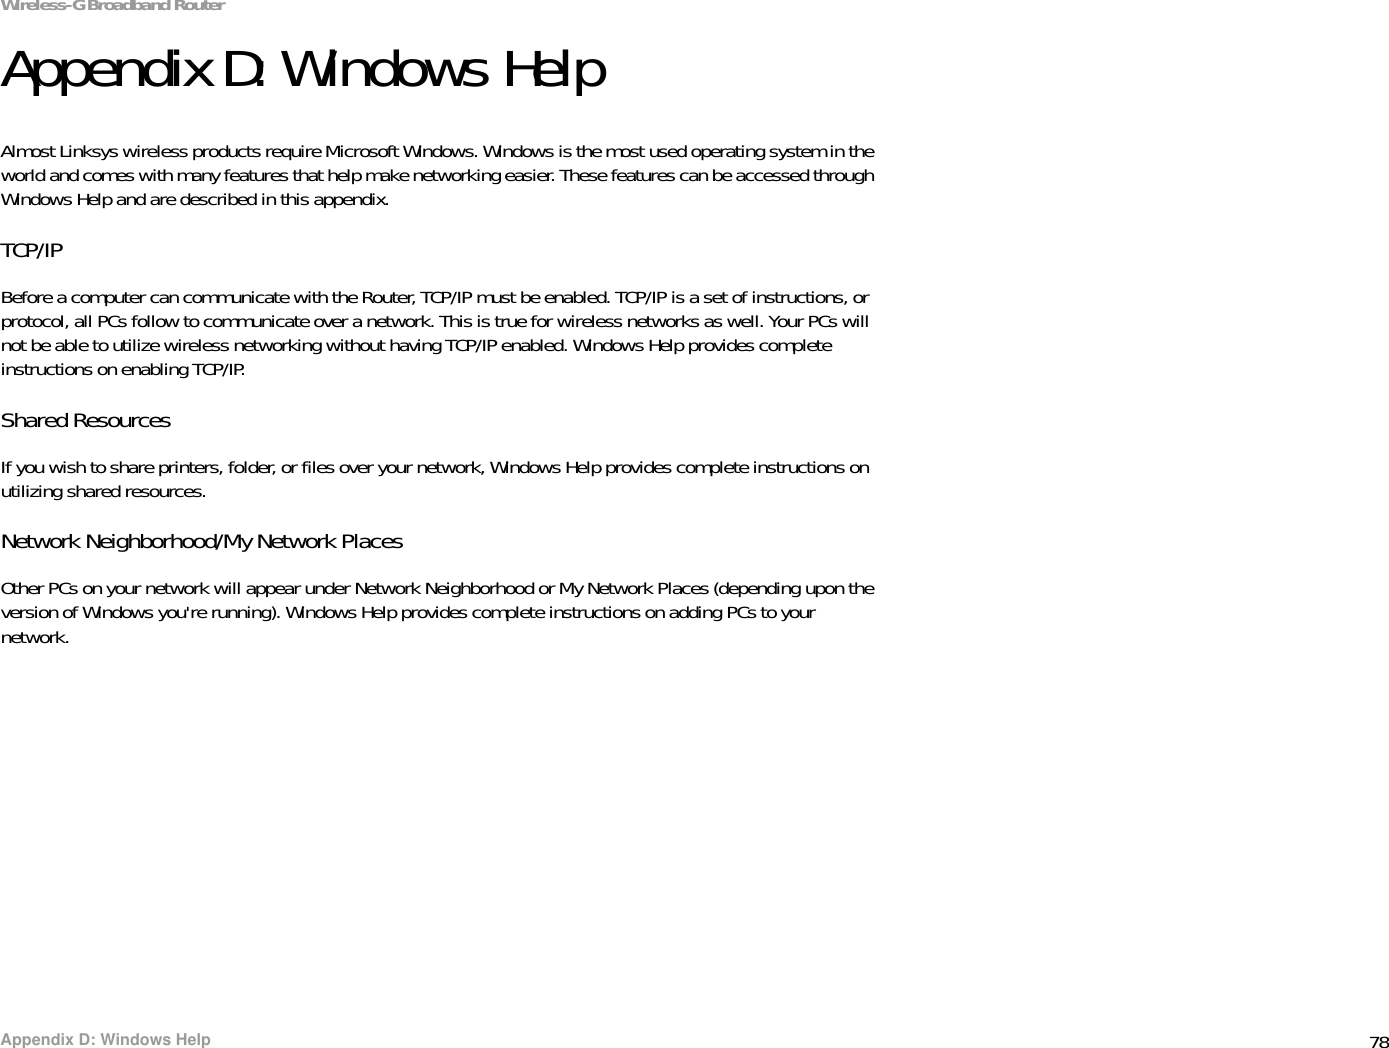 78Appendix D: Windows HelpWireless-G Broadband RouterAppendix D: Windows HelpAlmost Linksys wireless products require Microsoft Windows. Windows is the most used operating system in the world and comes with many features that help make networking easier. These features can be accessed through Windows Help and are described in this appendix.TCP/IPBefore a computer can communicate with the Router, TCP/IP must be enabled. TCP/IP is a set of instructions, or protocol, all PCs follow to communicate over a network. This is true for wireless networks as well. Your PCs will not be able to utilize wireless networking without having TCP/IP enabled. Windows Help provides complete instructions on enabling TCP/IP.Shared ResourcesIf you wish to share printers, folder, or files over your network, Windows Help provides complete instructions on utilizing shared resources.Network Neighborhood/My Network PlacesOther PCs on your network will appear under Network Neighborhood or My Network Places (depending upon the version of Windows you&apos;re running). Windows Help provides complete instructions on adding PCs to your network.